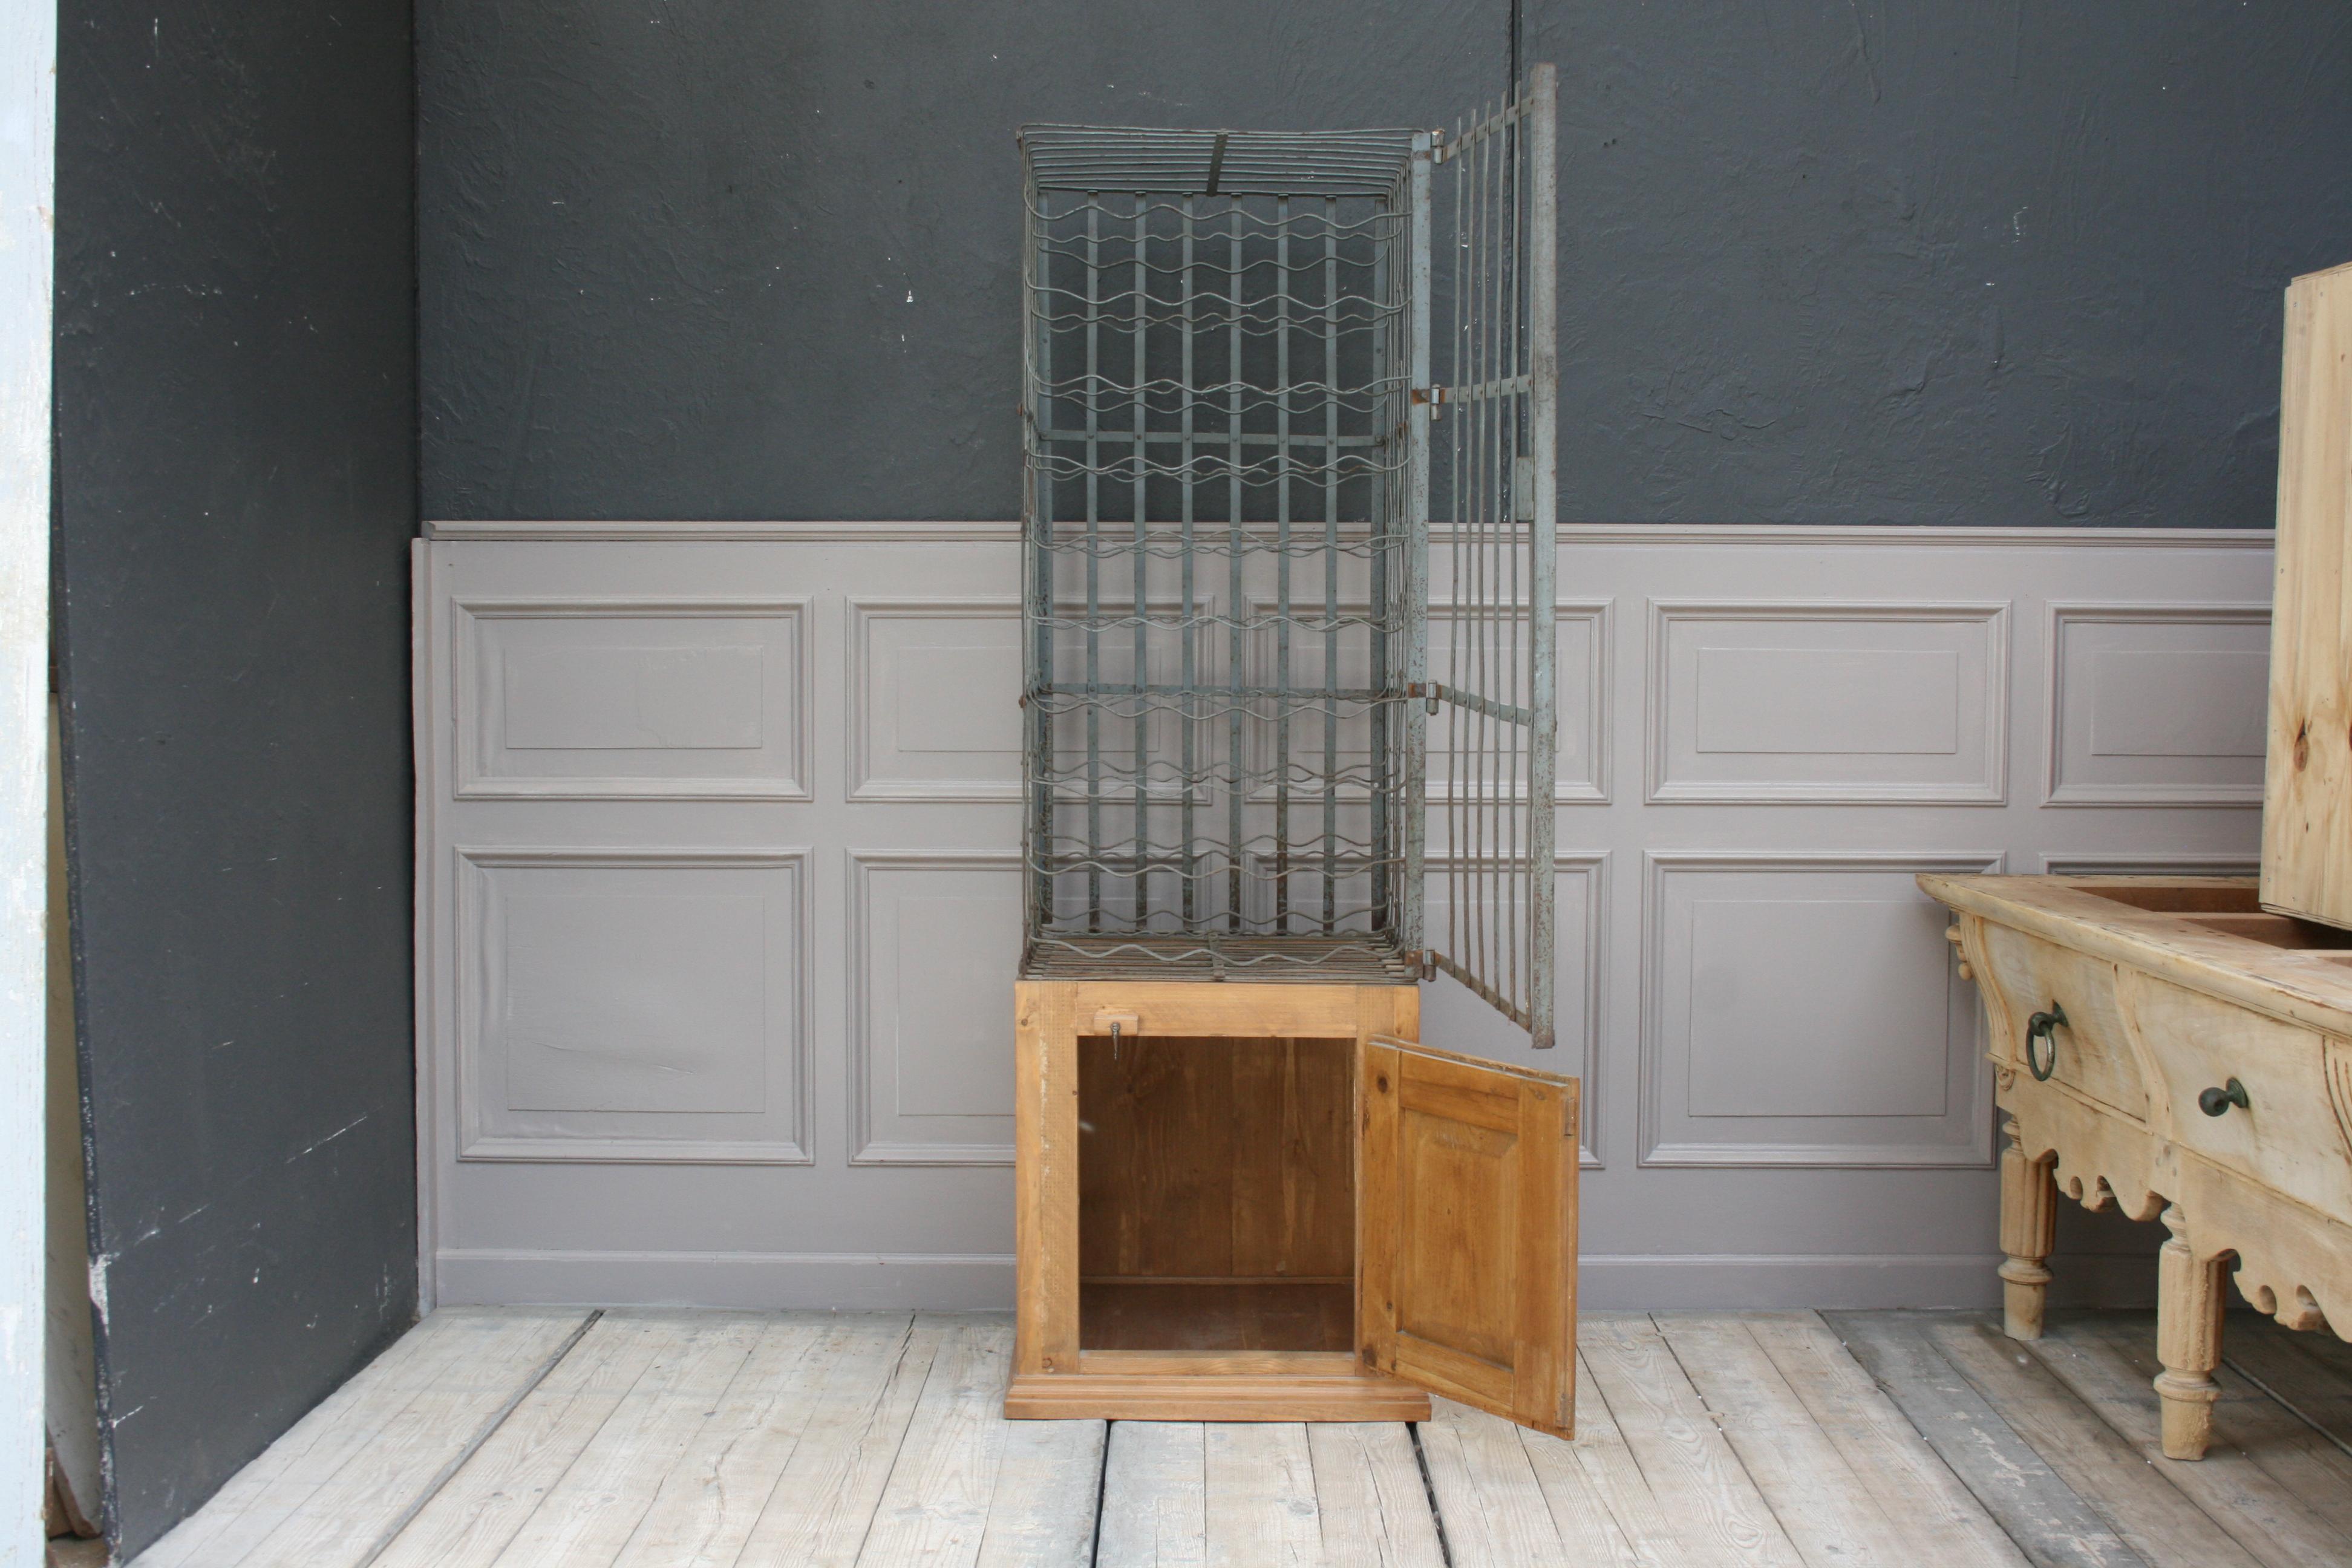 Early 20th century French wine cage with wooden cabinet. The cabinet was newly built with the original old door.
Dimensions:
61/ 175 cm high / 24/ 68.89 inch high,
58 cm wide / 22.83 inch wide,
56 cm deep / 22.04 inch deep.